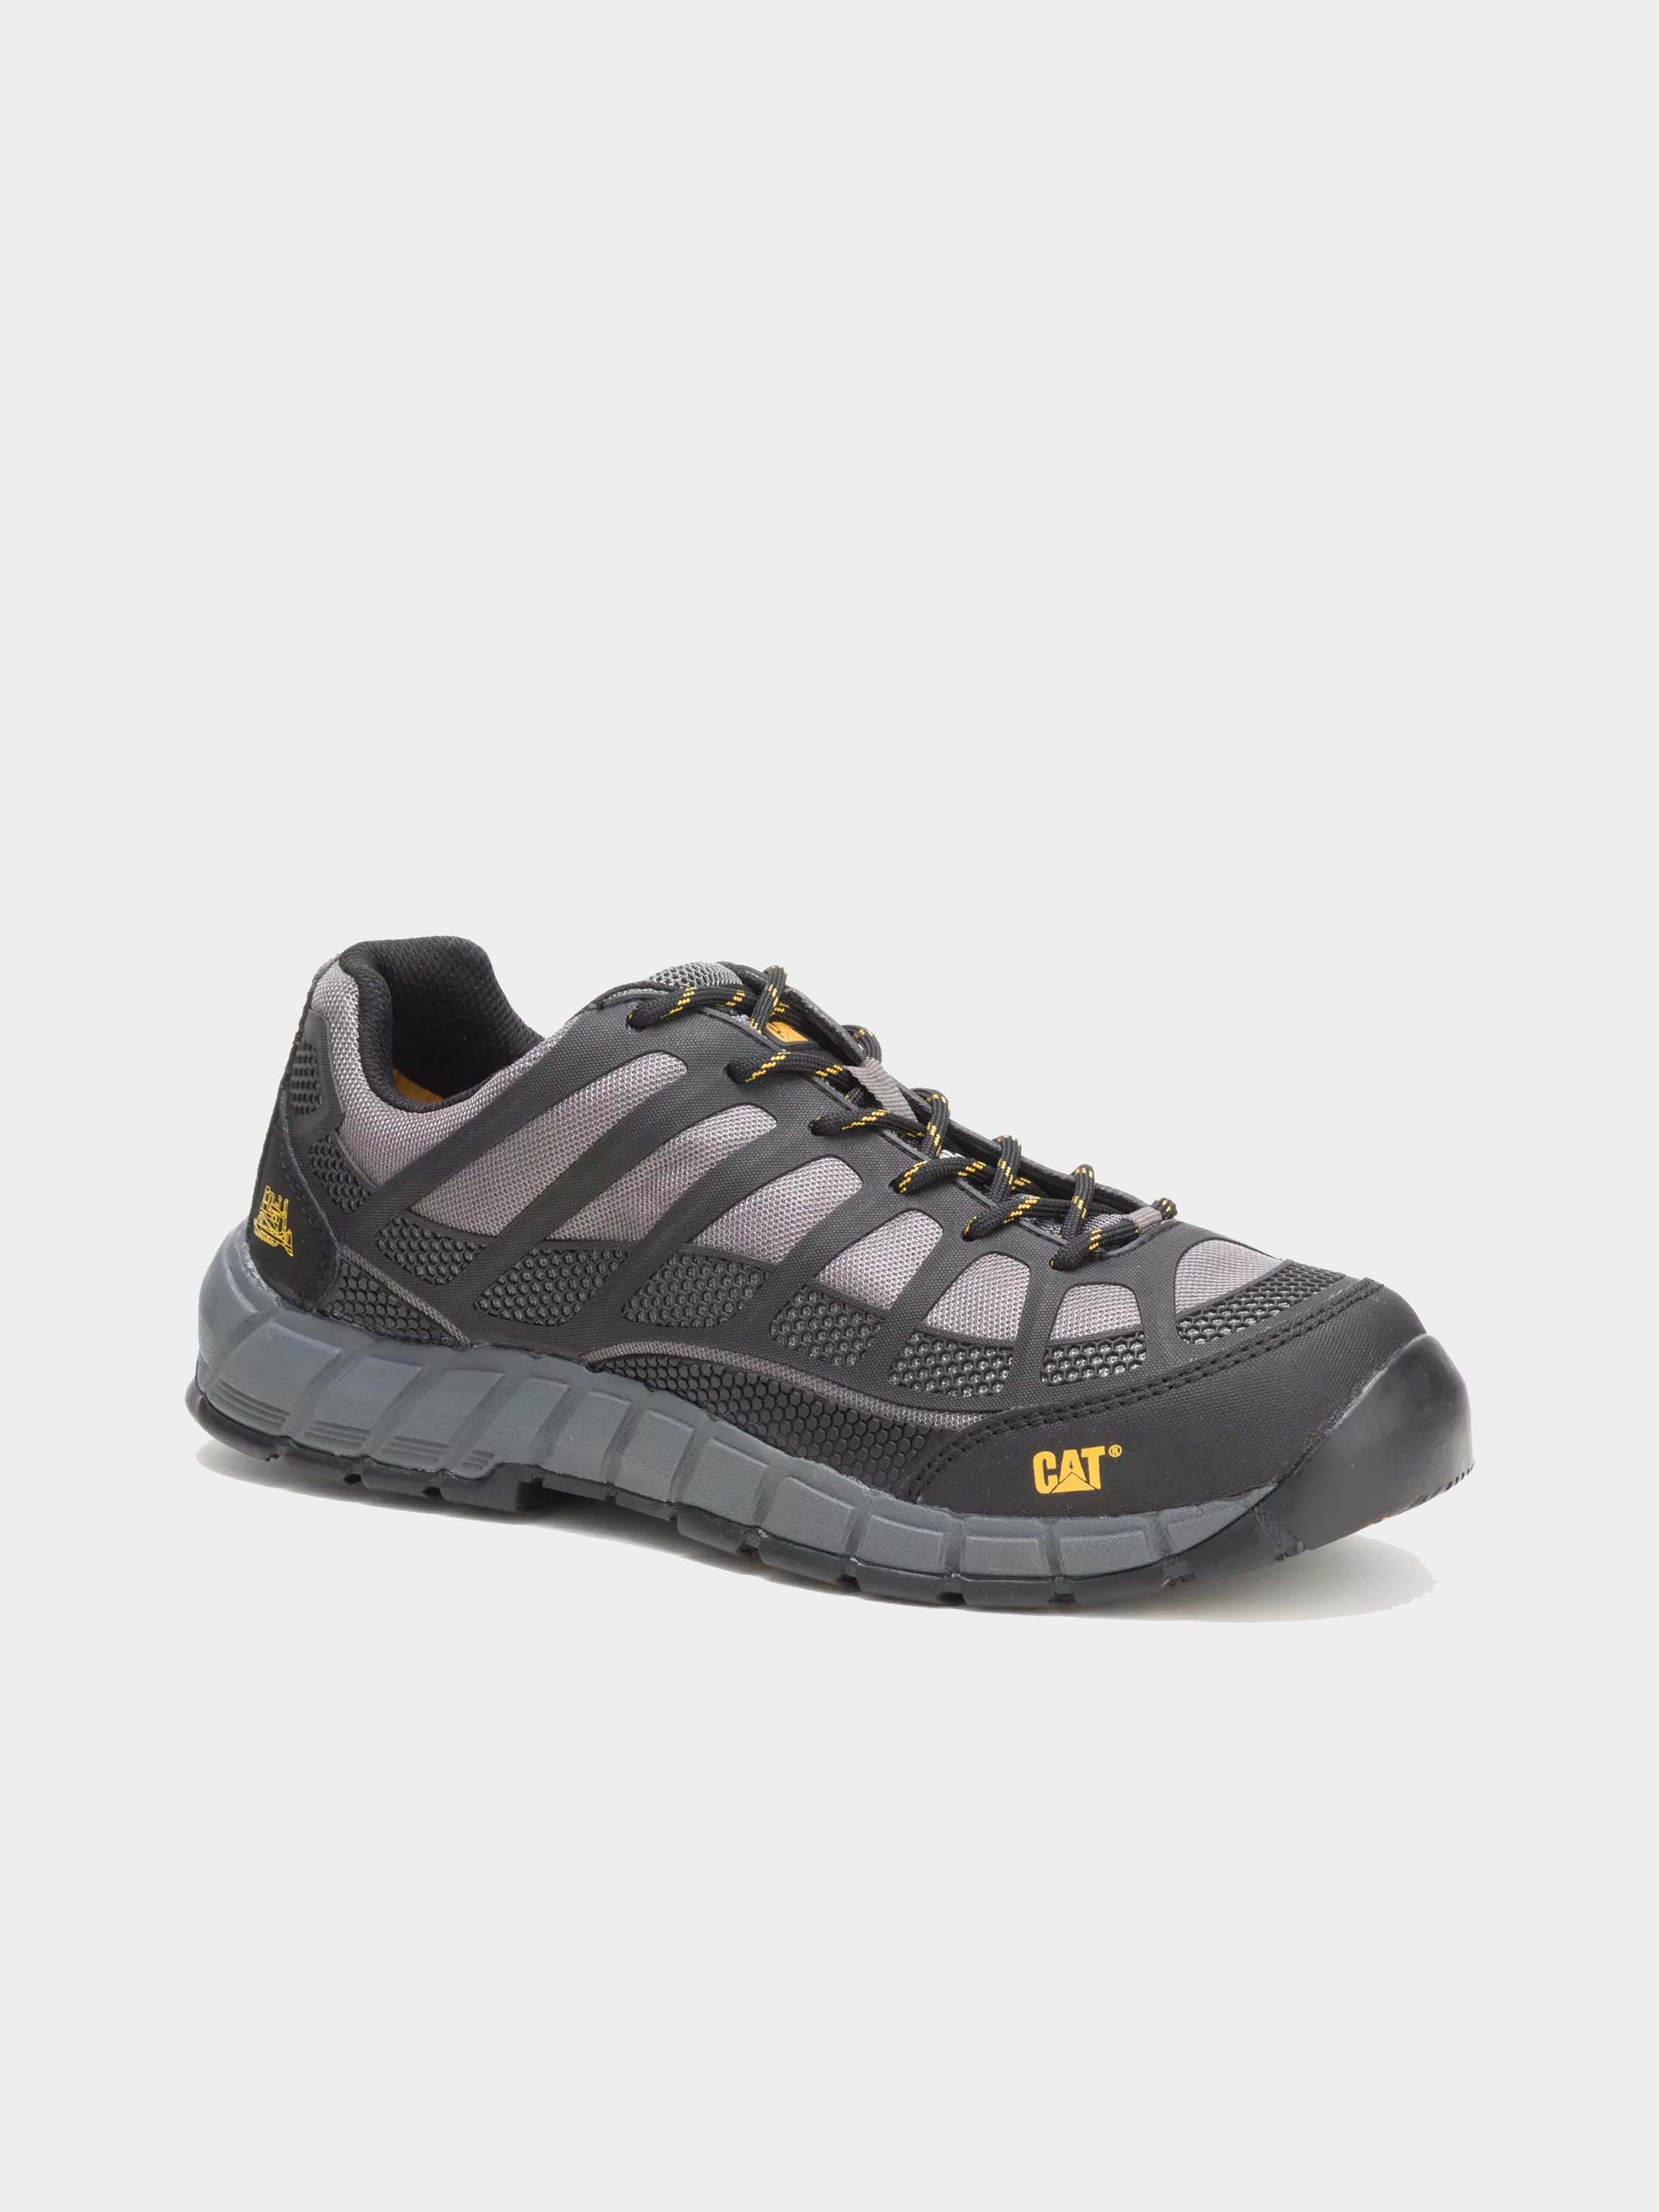 Caterpillar Footwear: Rugged Work Boots & Shoes – Steel Toes